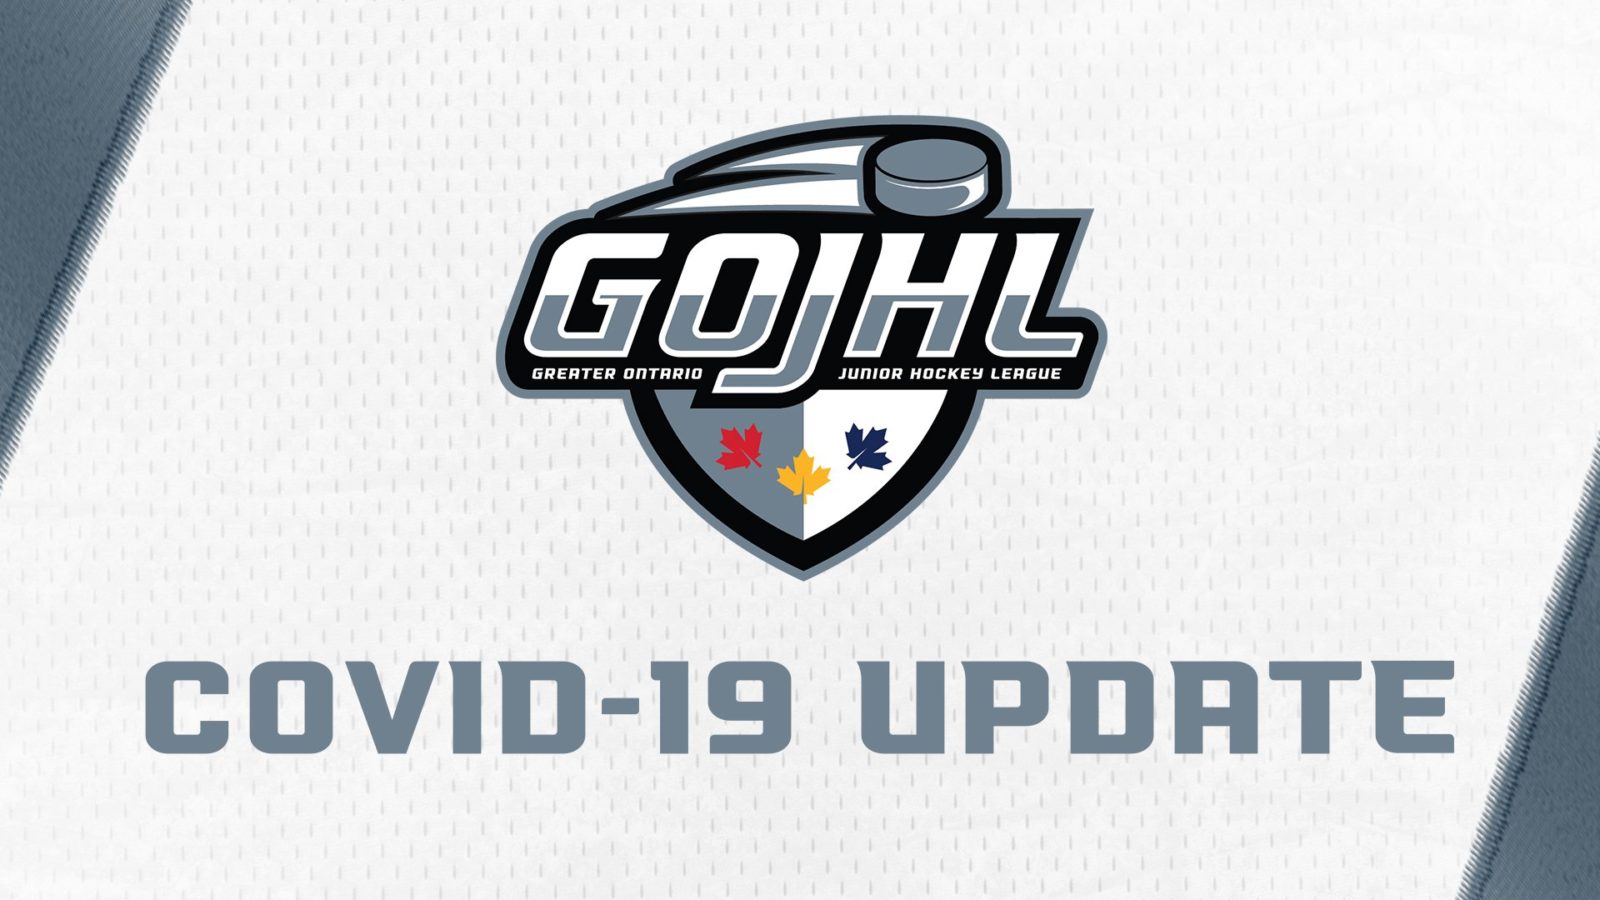 GOJHL Announces The Cancellation of the 2020-21 Season